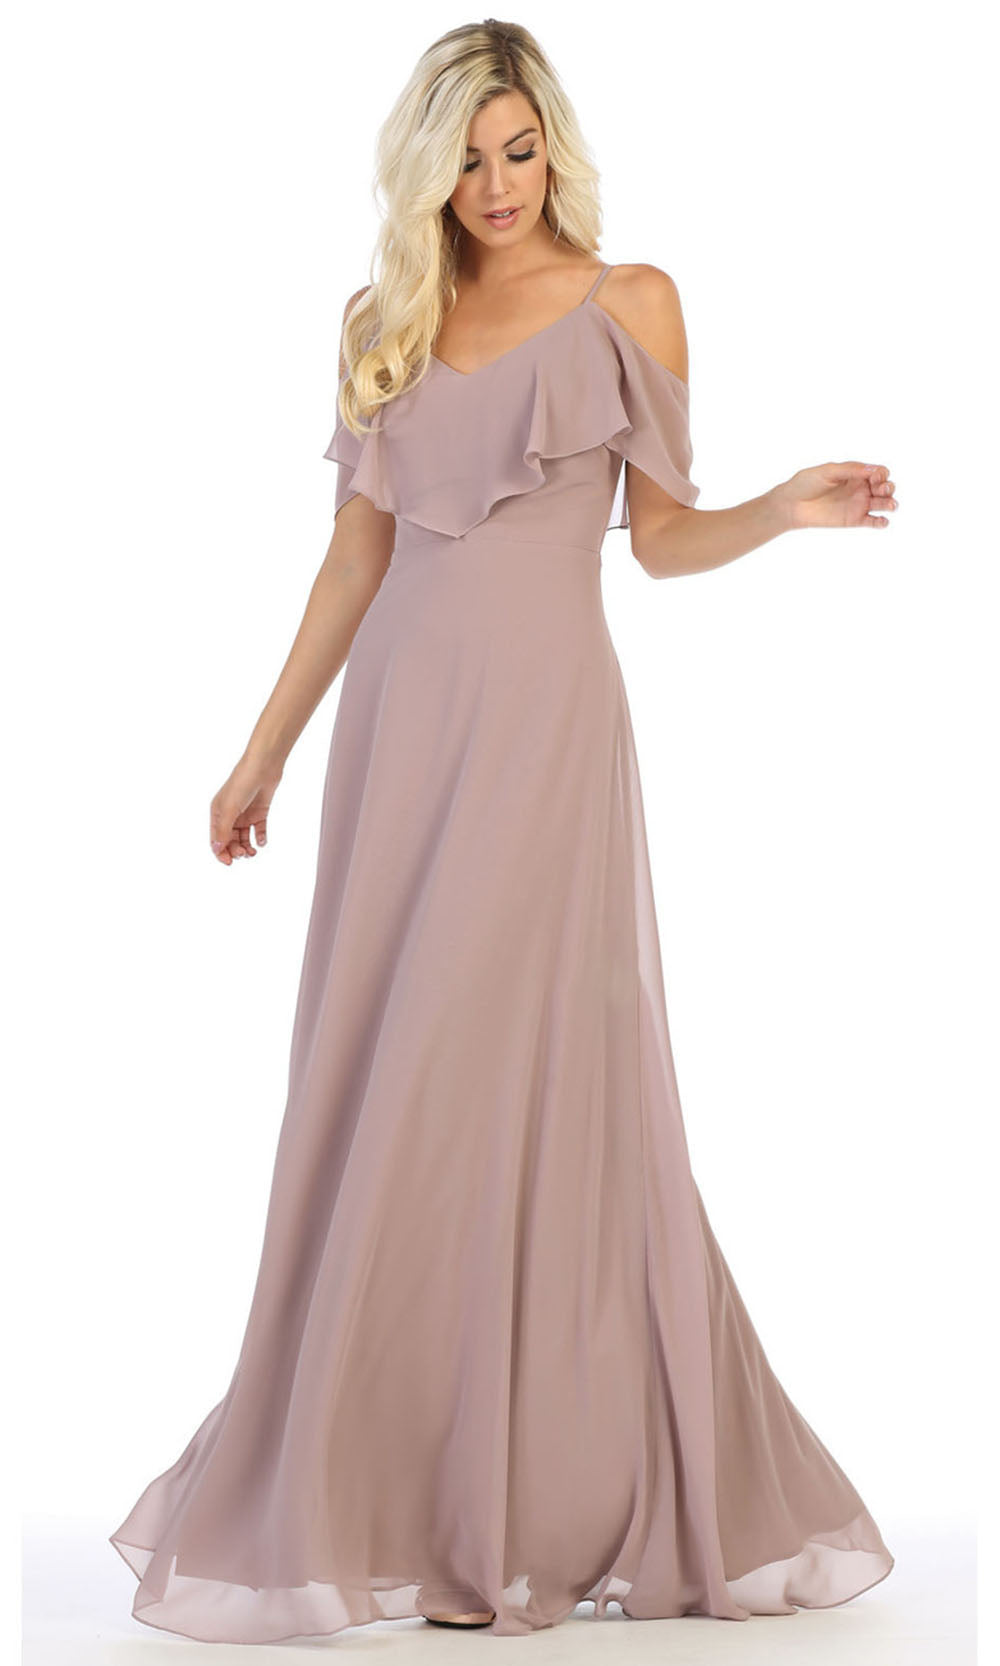 May Queen - MQ1686 Cold Shoulder Chiffon Dress In Purple and Gray